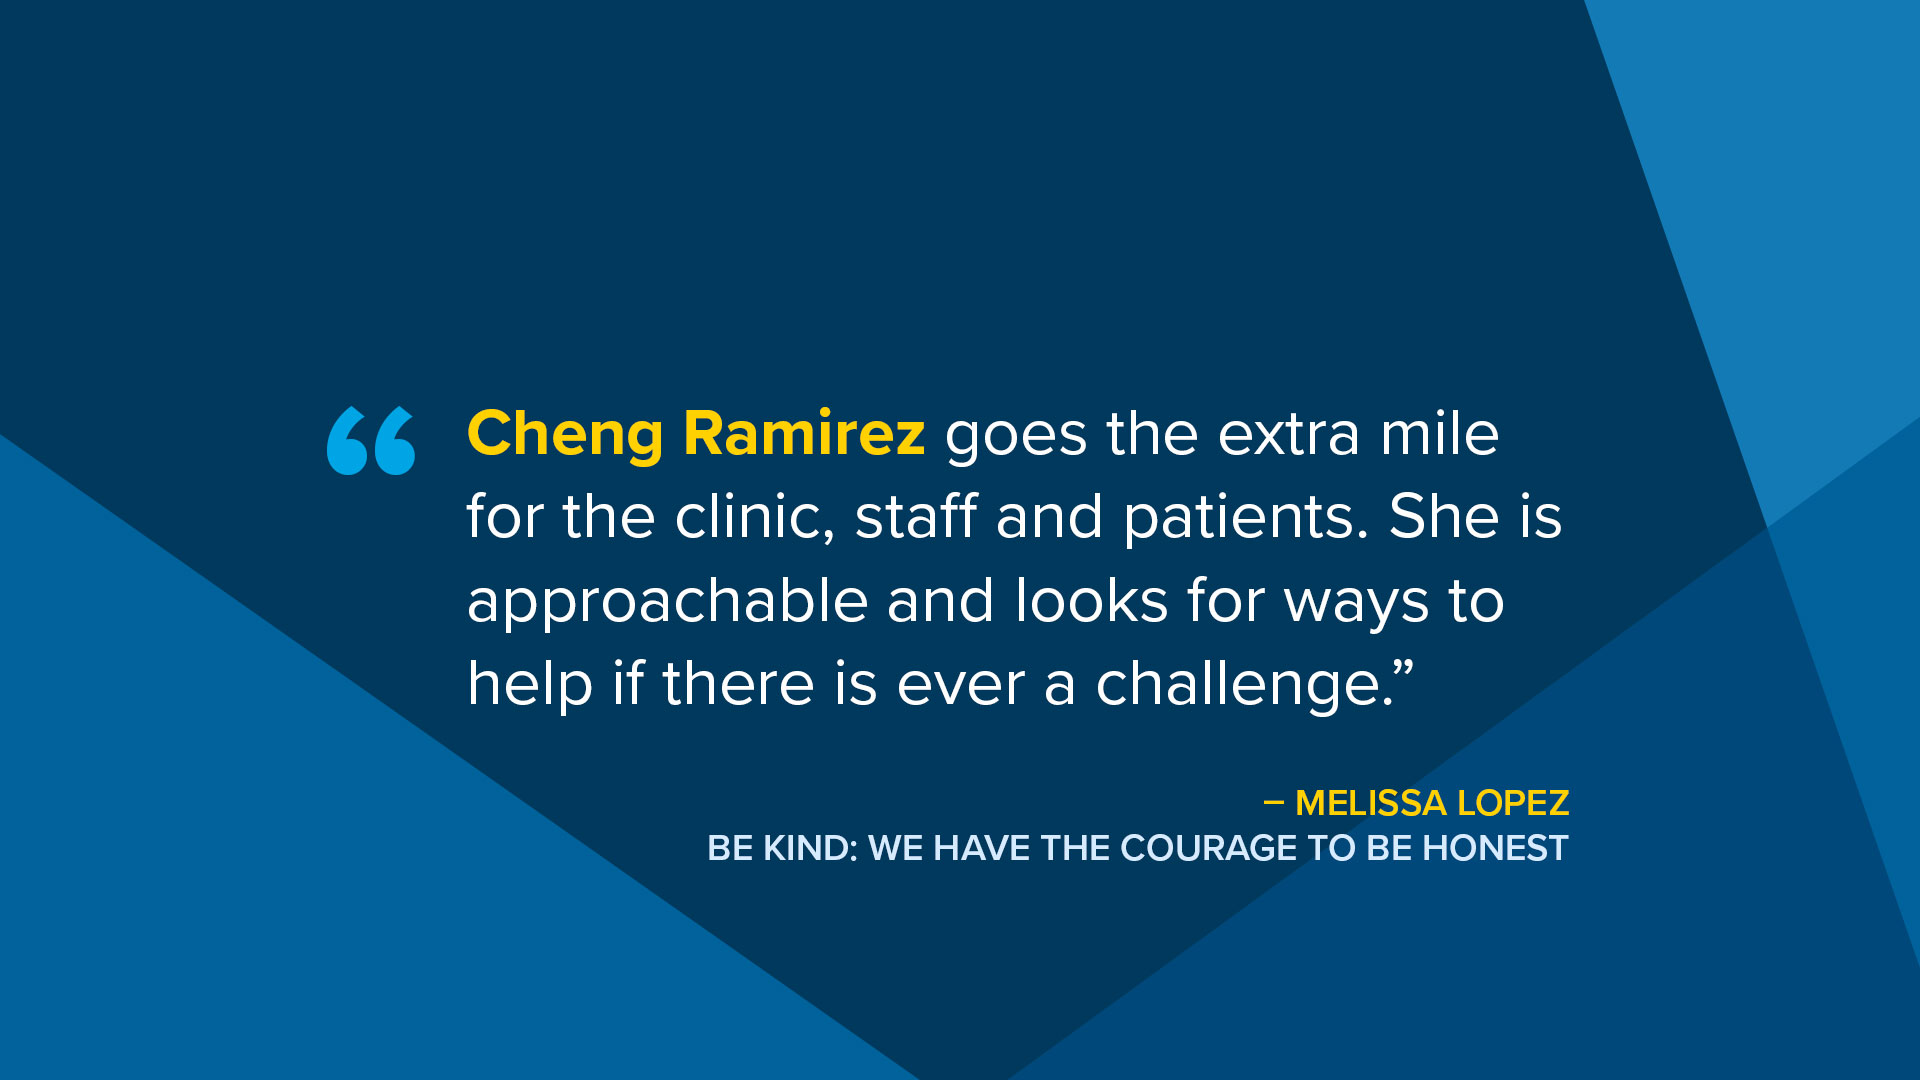 Cheng Ramirez goes the extra mile for the clinic, staff and patients. She is approachable and looks for ways to hep if there is ever a challenge.